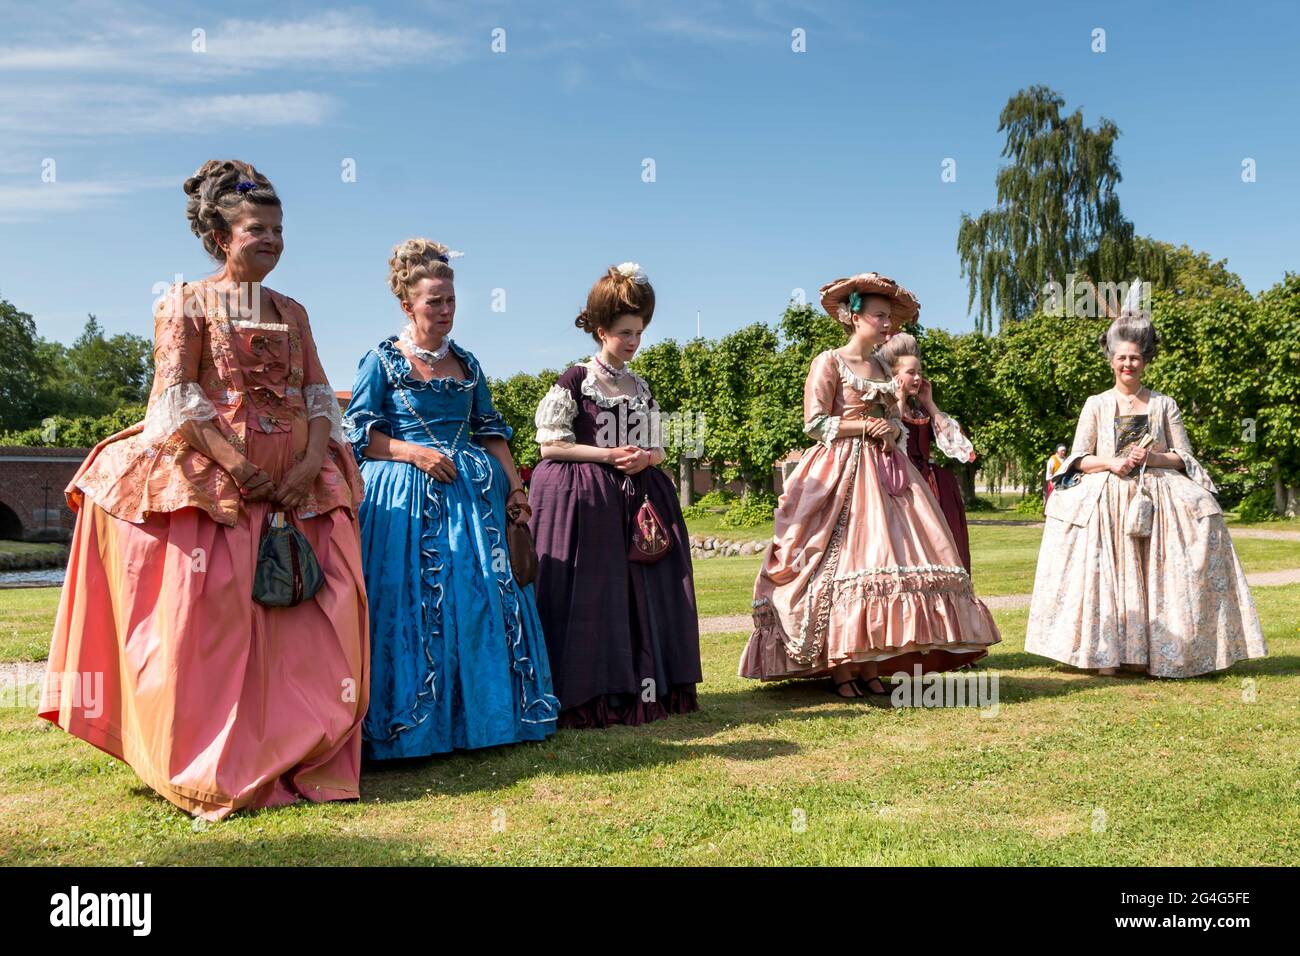 Auning, Denmark - 19 June 2021: 18th century day at Gammel Estrup Castle, People are dressed as in the 18th century and everything passes as then. Wom Stock Photo